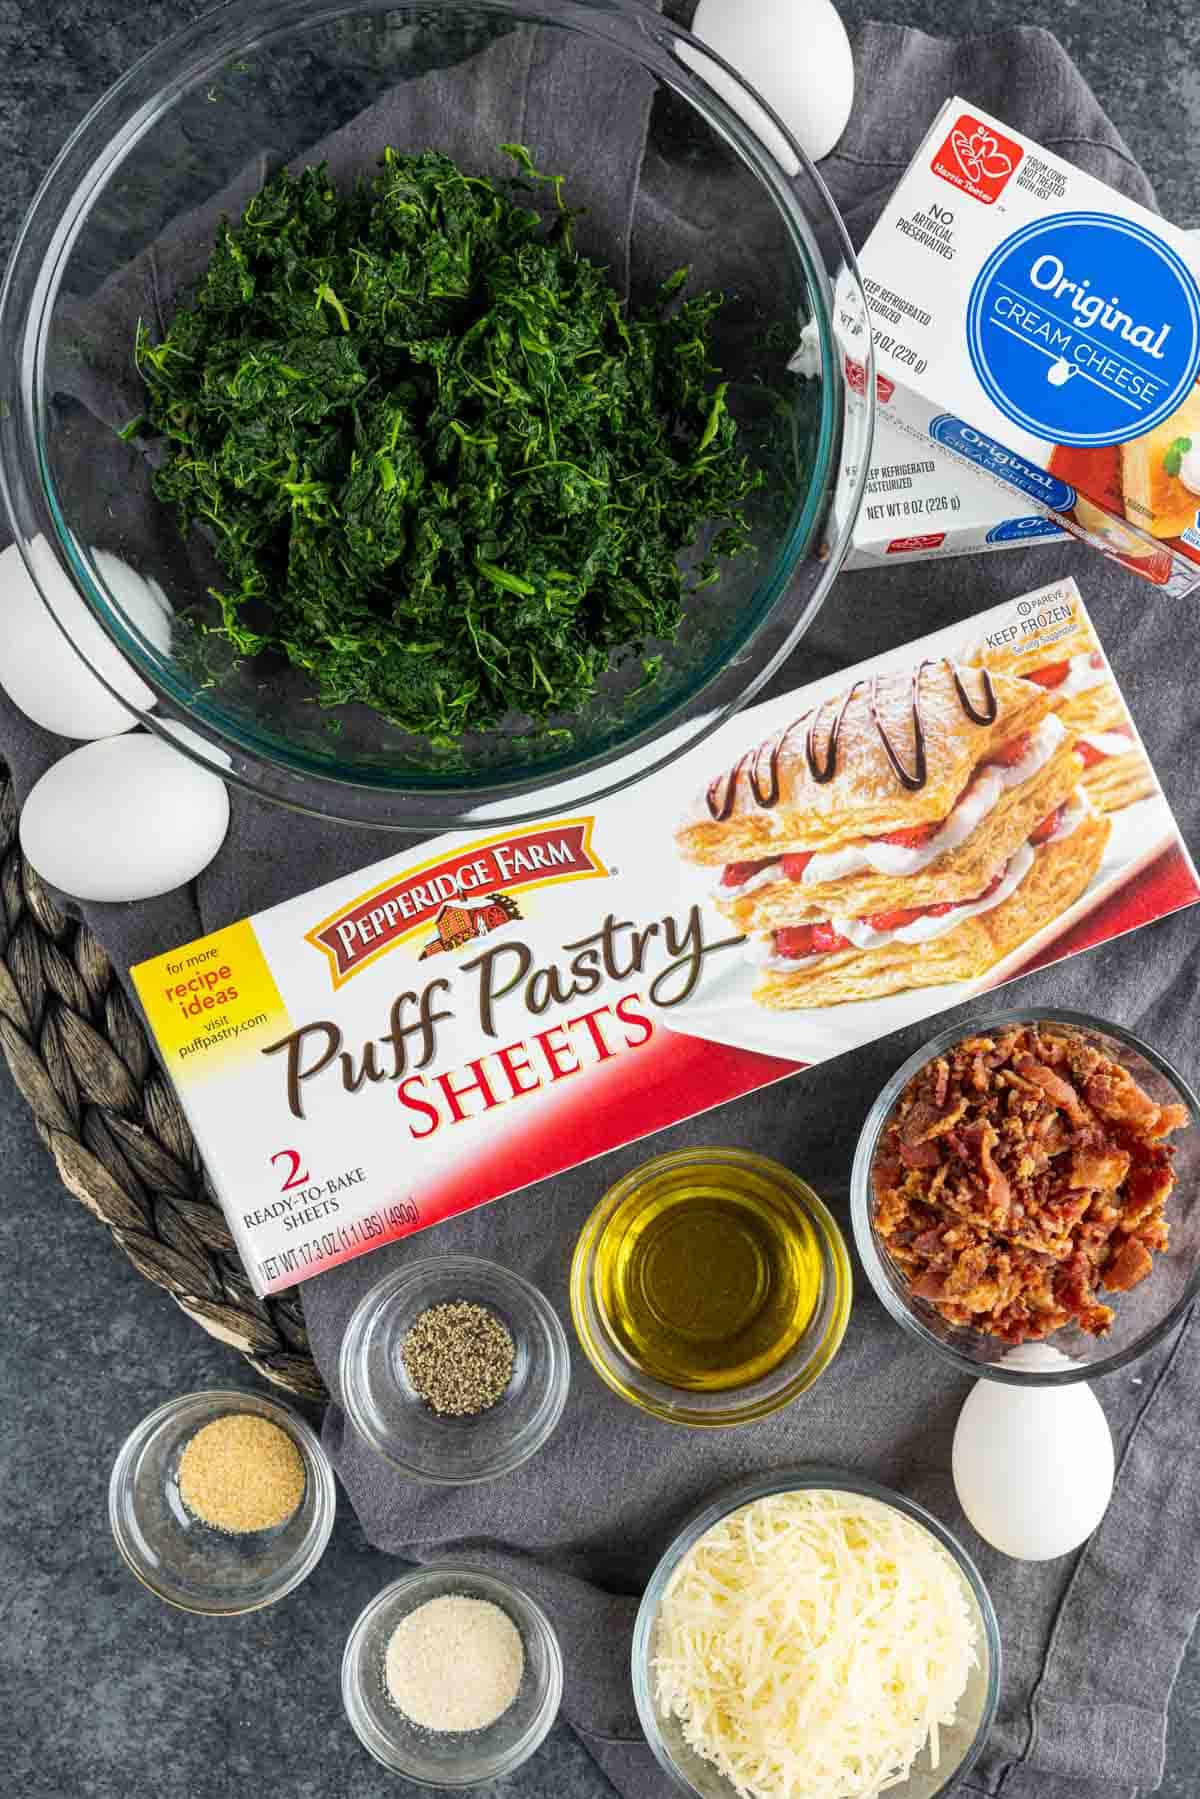 Ingredients for Spinach Puffs, puff pastry sheets with spinach, eggs and cheese.